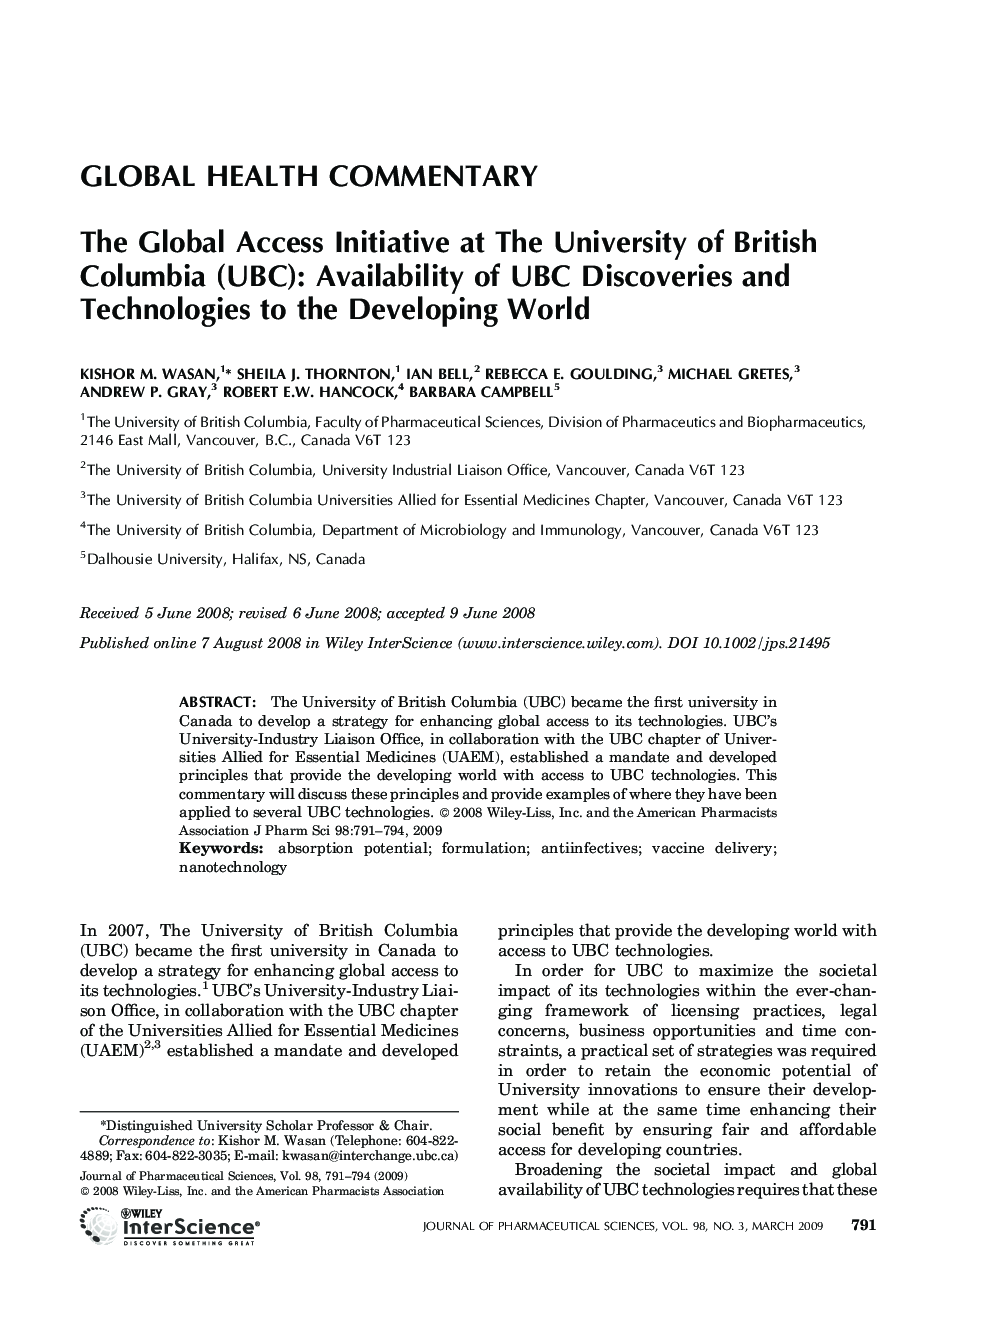 The Global Access Initiative at the University of British Columbia (UBC): Availability of UBC Discoveries and Technologies to the Developing World